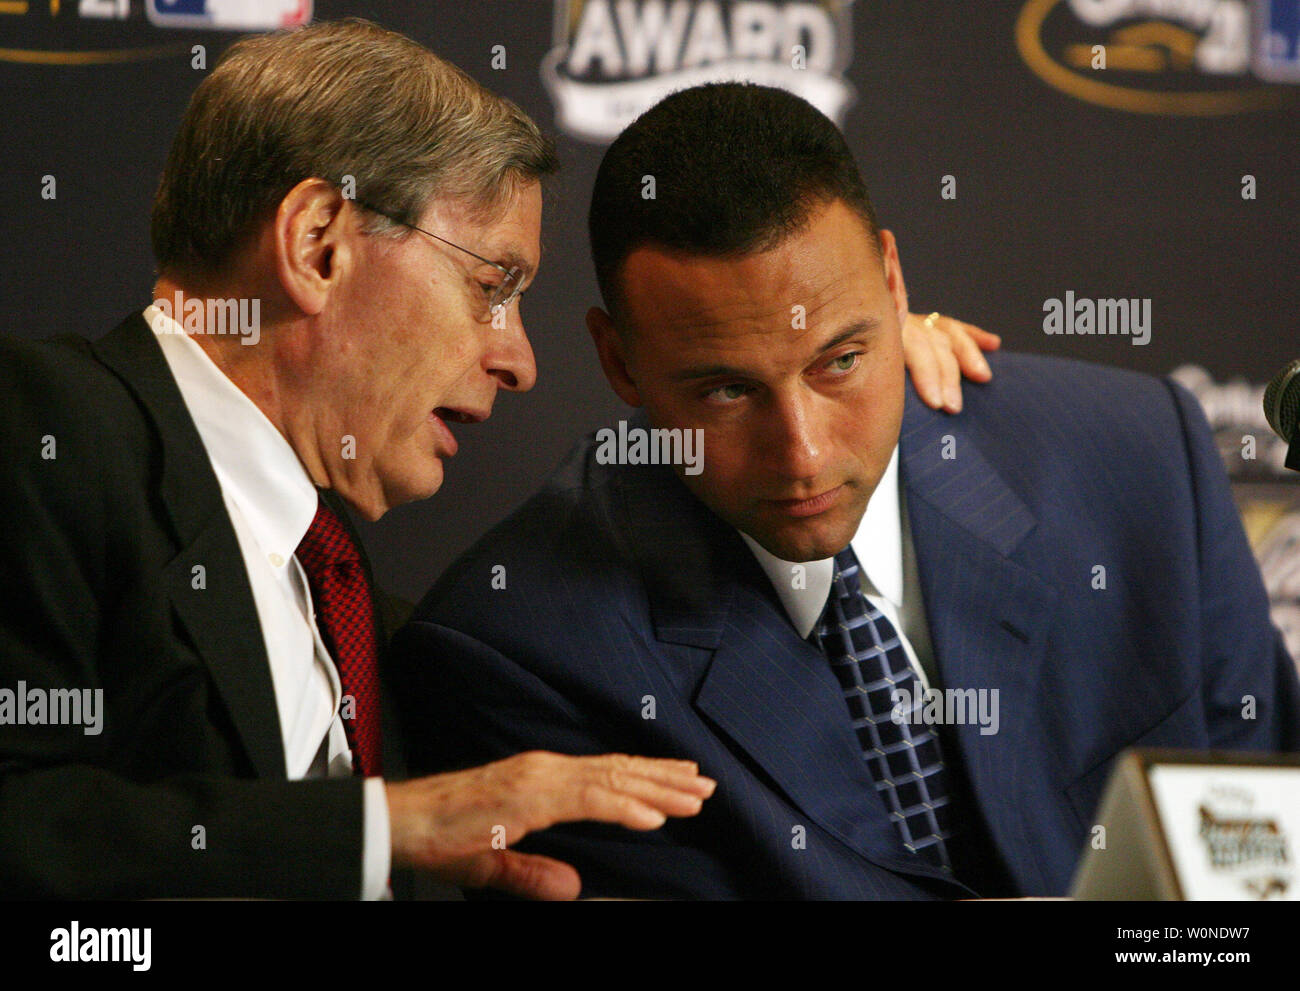 Baseball Commissioner Bud Selig (L) chats with Derek Jeter of the New York Yankees before the awarding of the 2006 Hank Aaron Award at Busch Stadium in St. Louis on October 25, 2006.  National League player Philadelphia Phillies Ryan Howard was also given the award.  (UPI Photo/Bill Greenblatt) Stock Photo